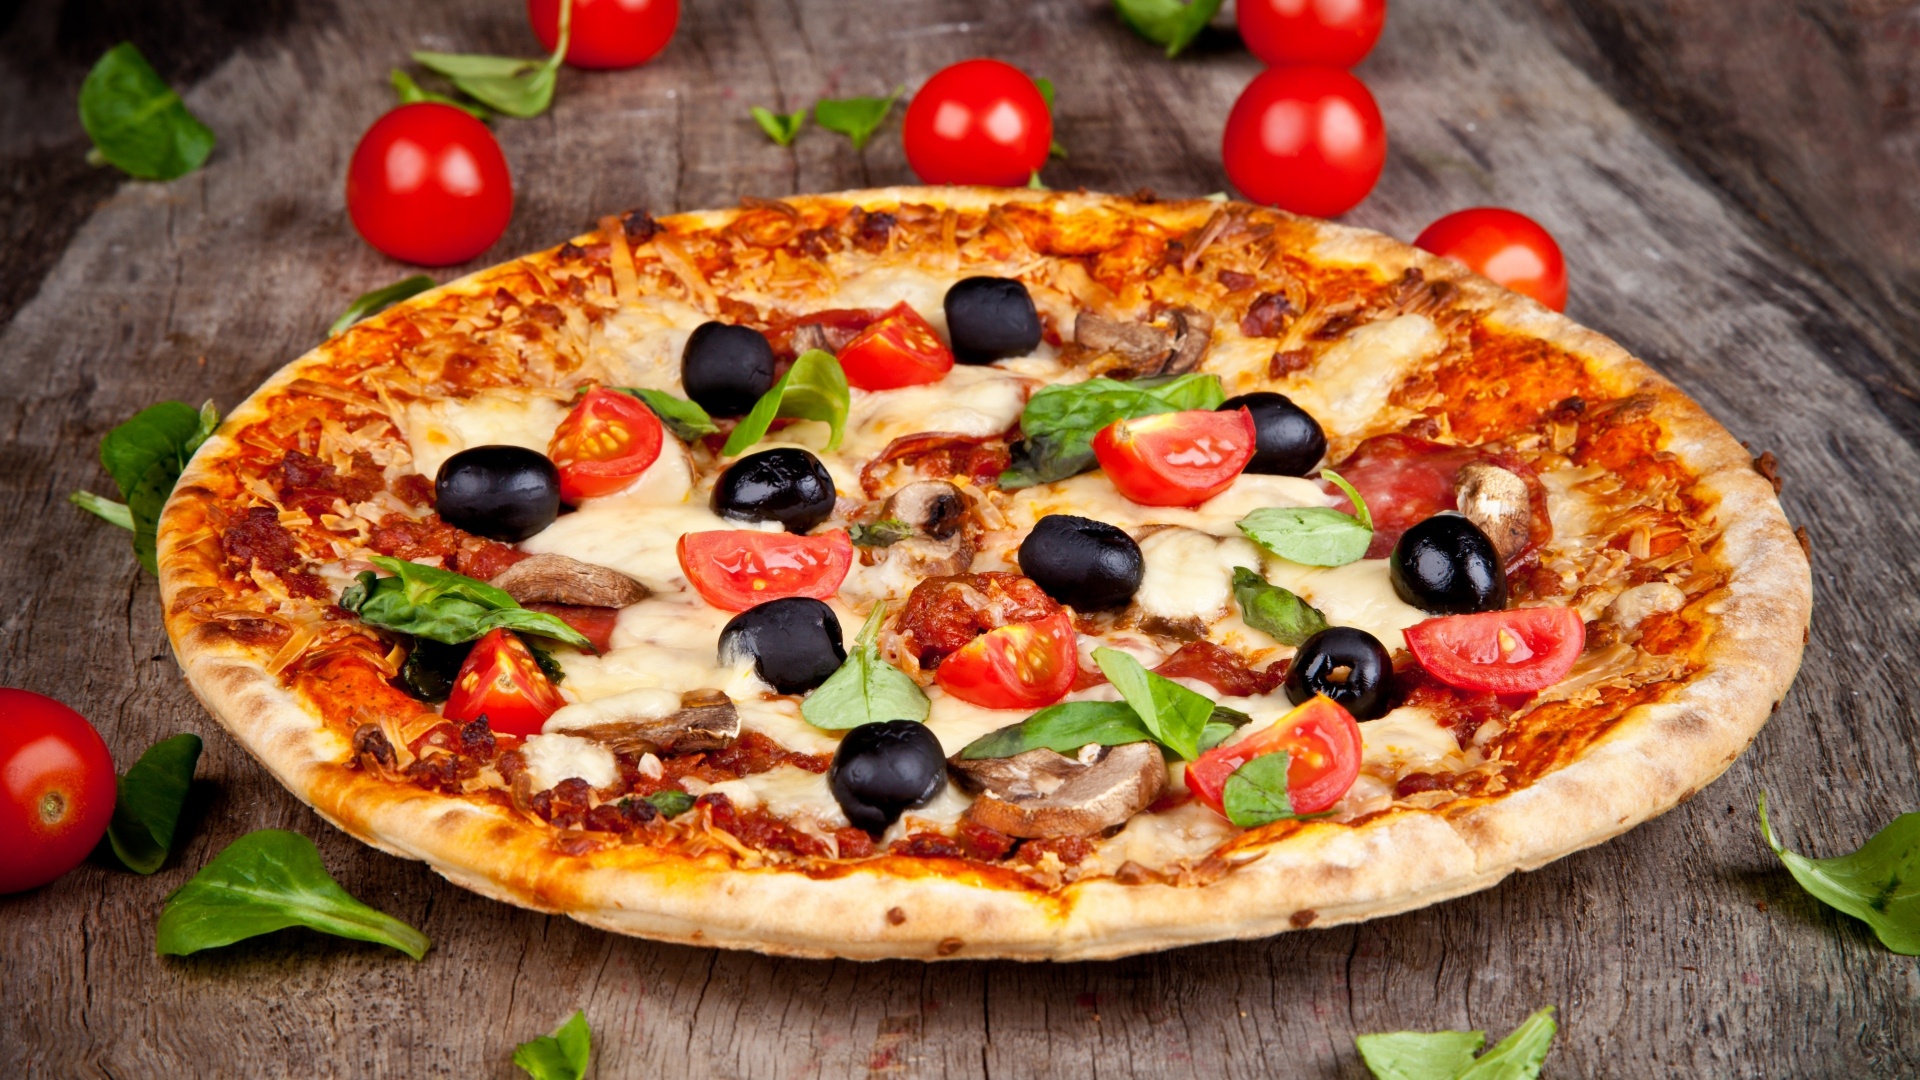 Pizza toppings wallpaper, Delicious combination, Food photography, Appetizing image, 1920x1080 Full HD Desktop